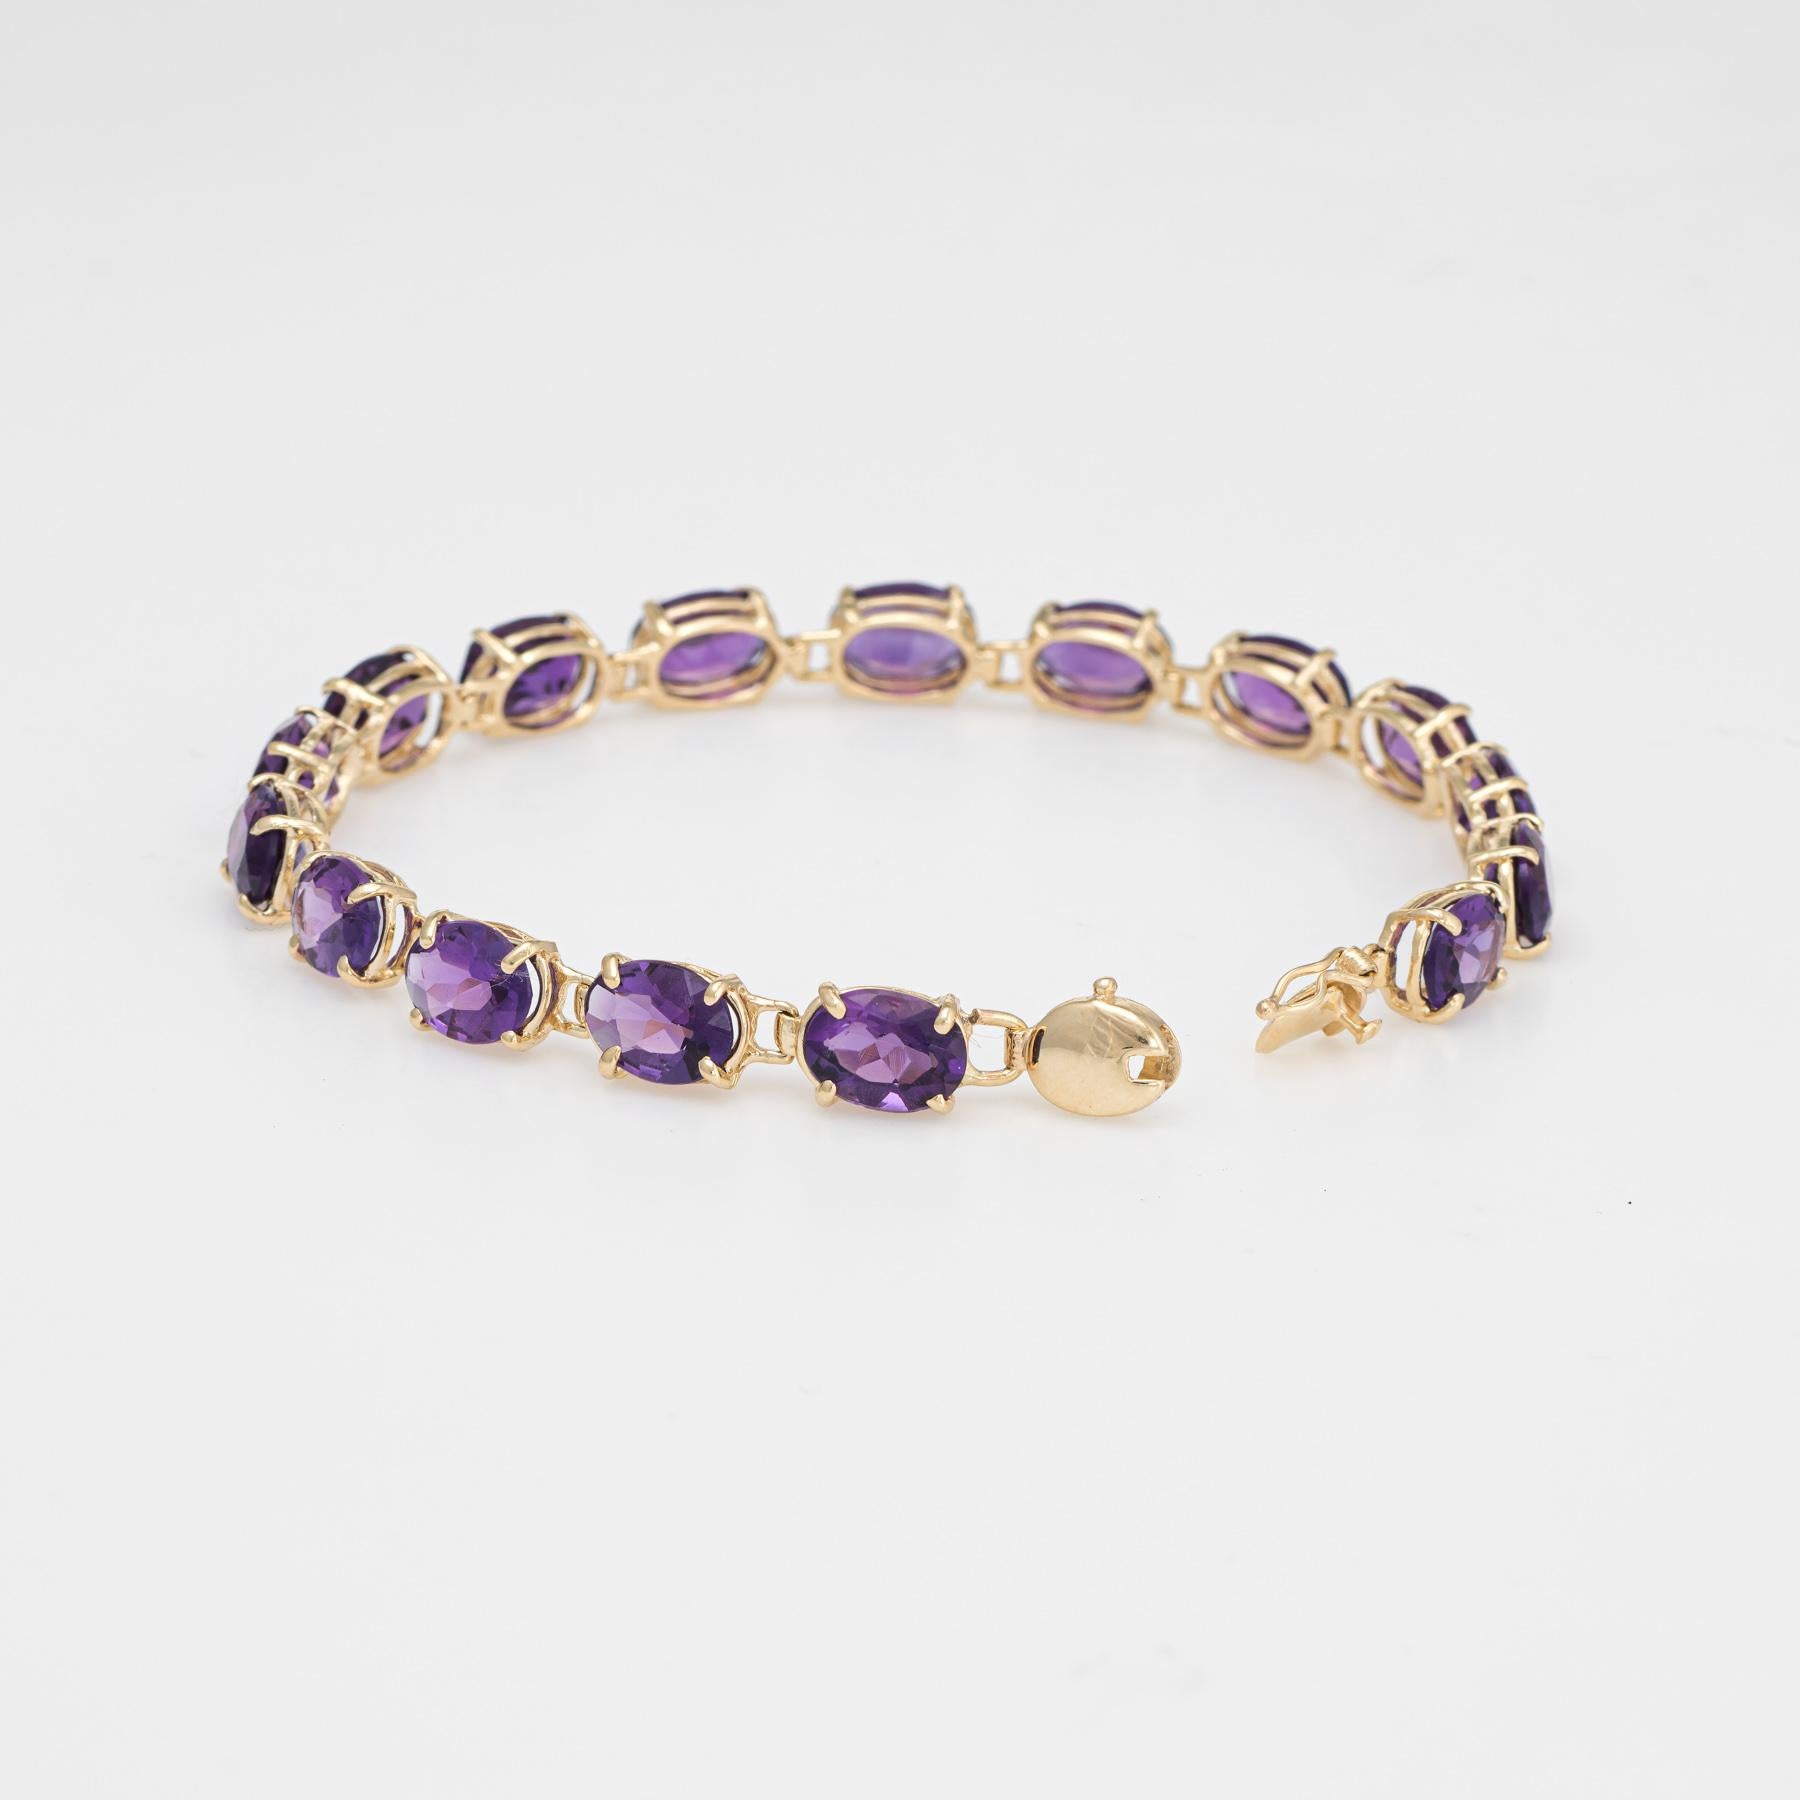 Stylish and finely detailed estate amethyst tennis bracelet crafted in 14 karat yellow gold. 

The amethysts measure 8mm x 6mm (estimated at 1 carat each) total an estimated 16 carats. The amethysts are in excellent condition and free of cracks or